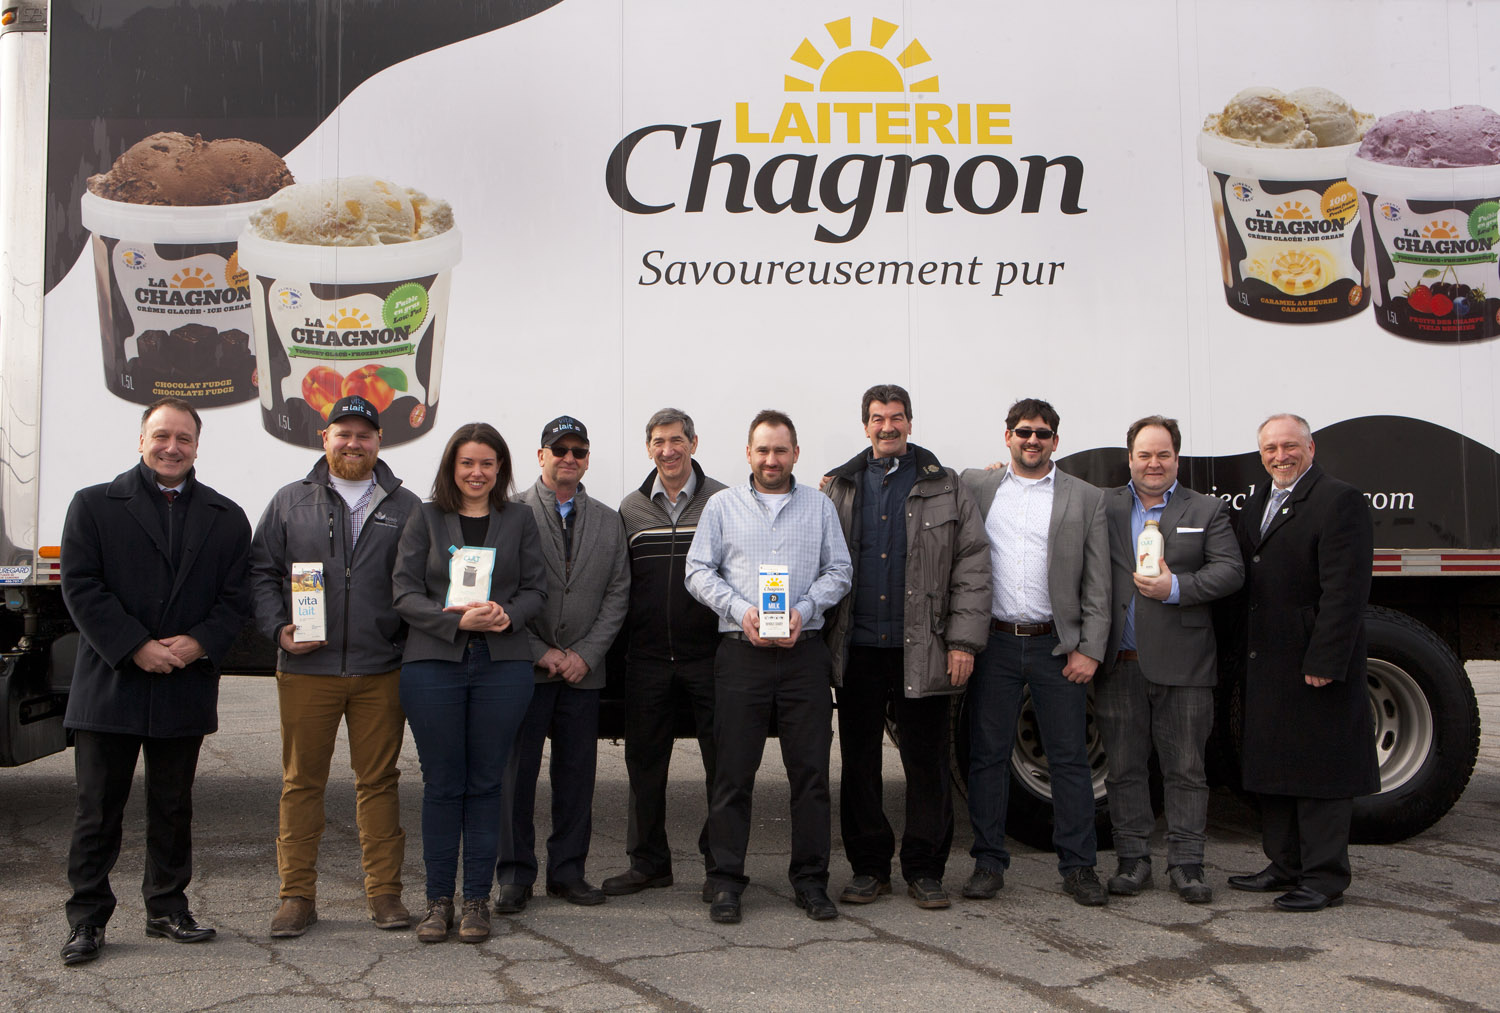 New Chagnon owners commit to consistency